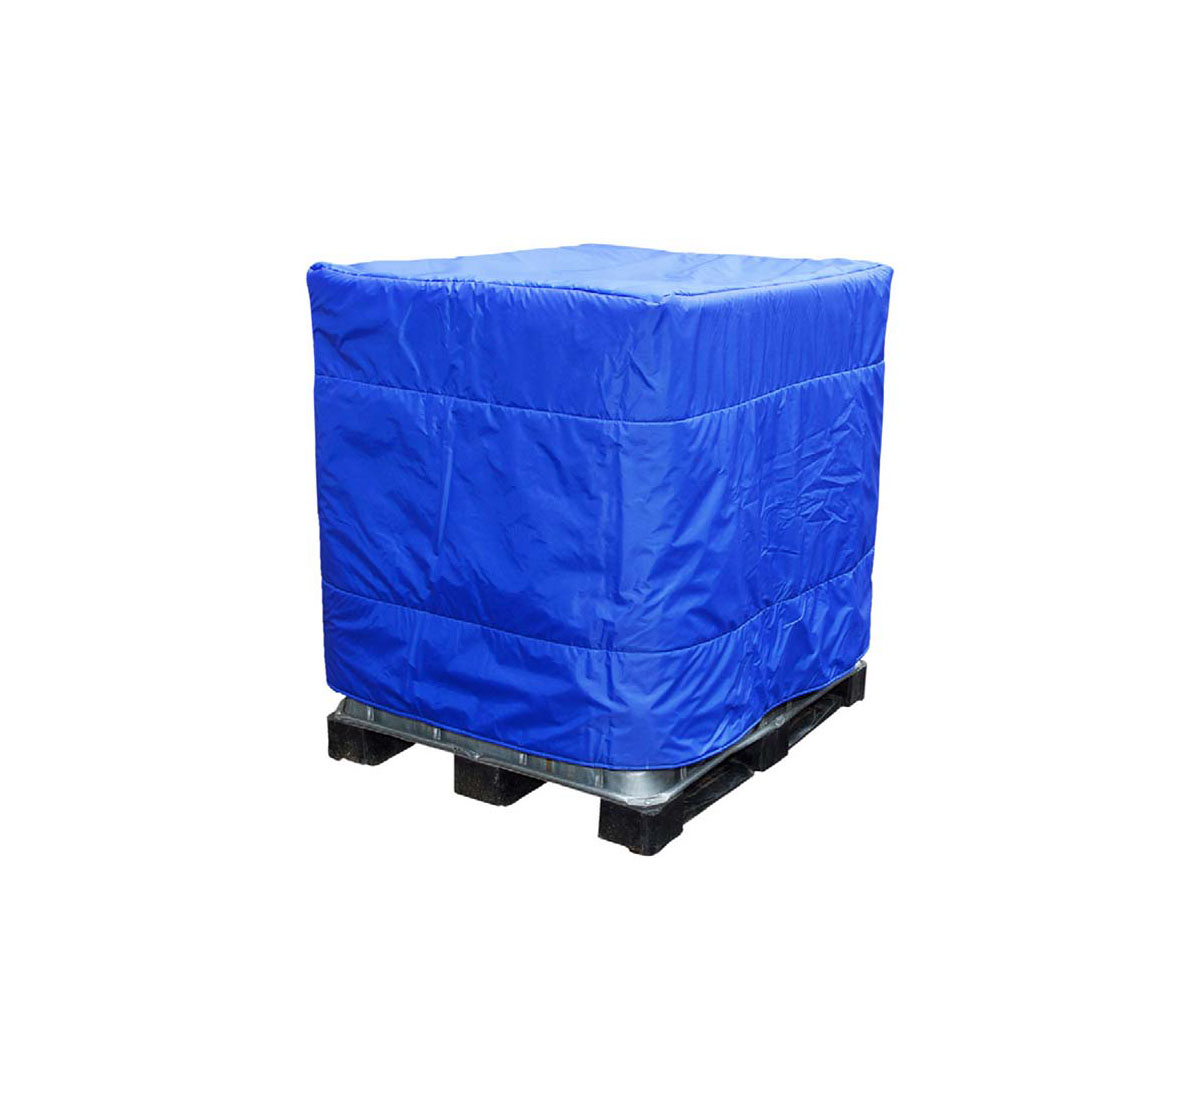 A picture of an Insulation cover for IBC containers with casing of nylon